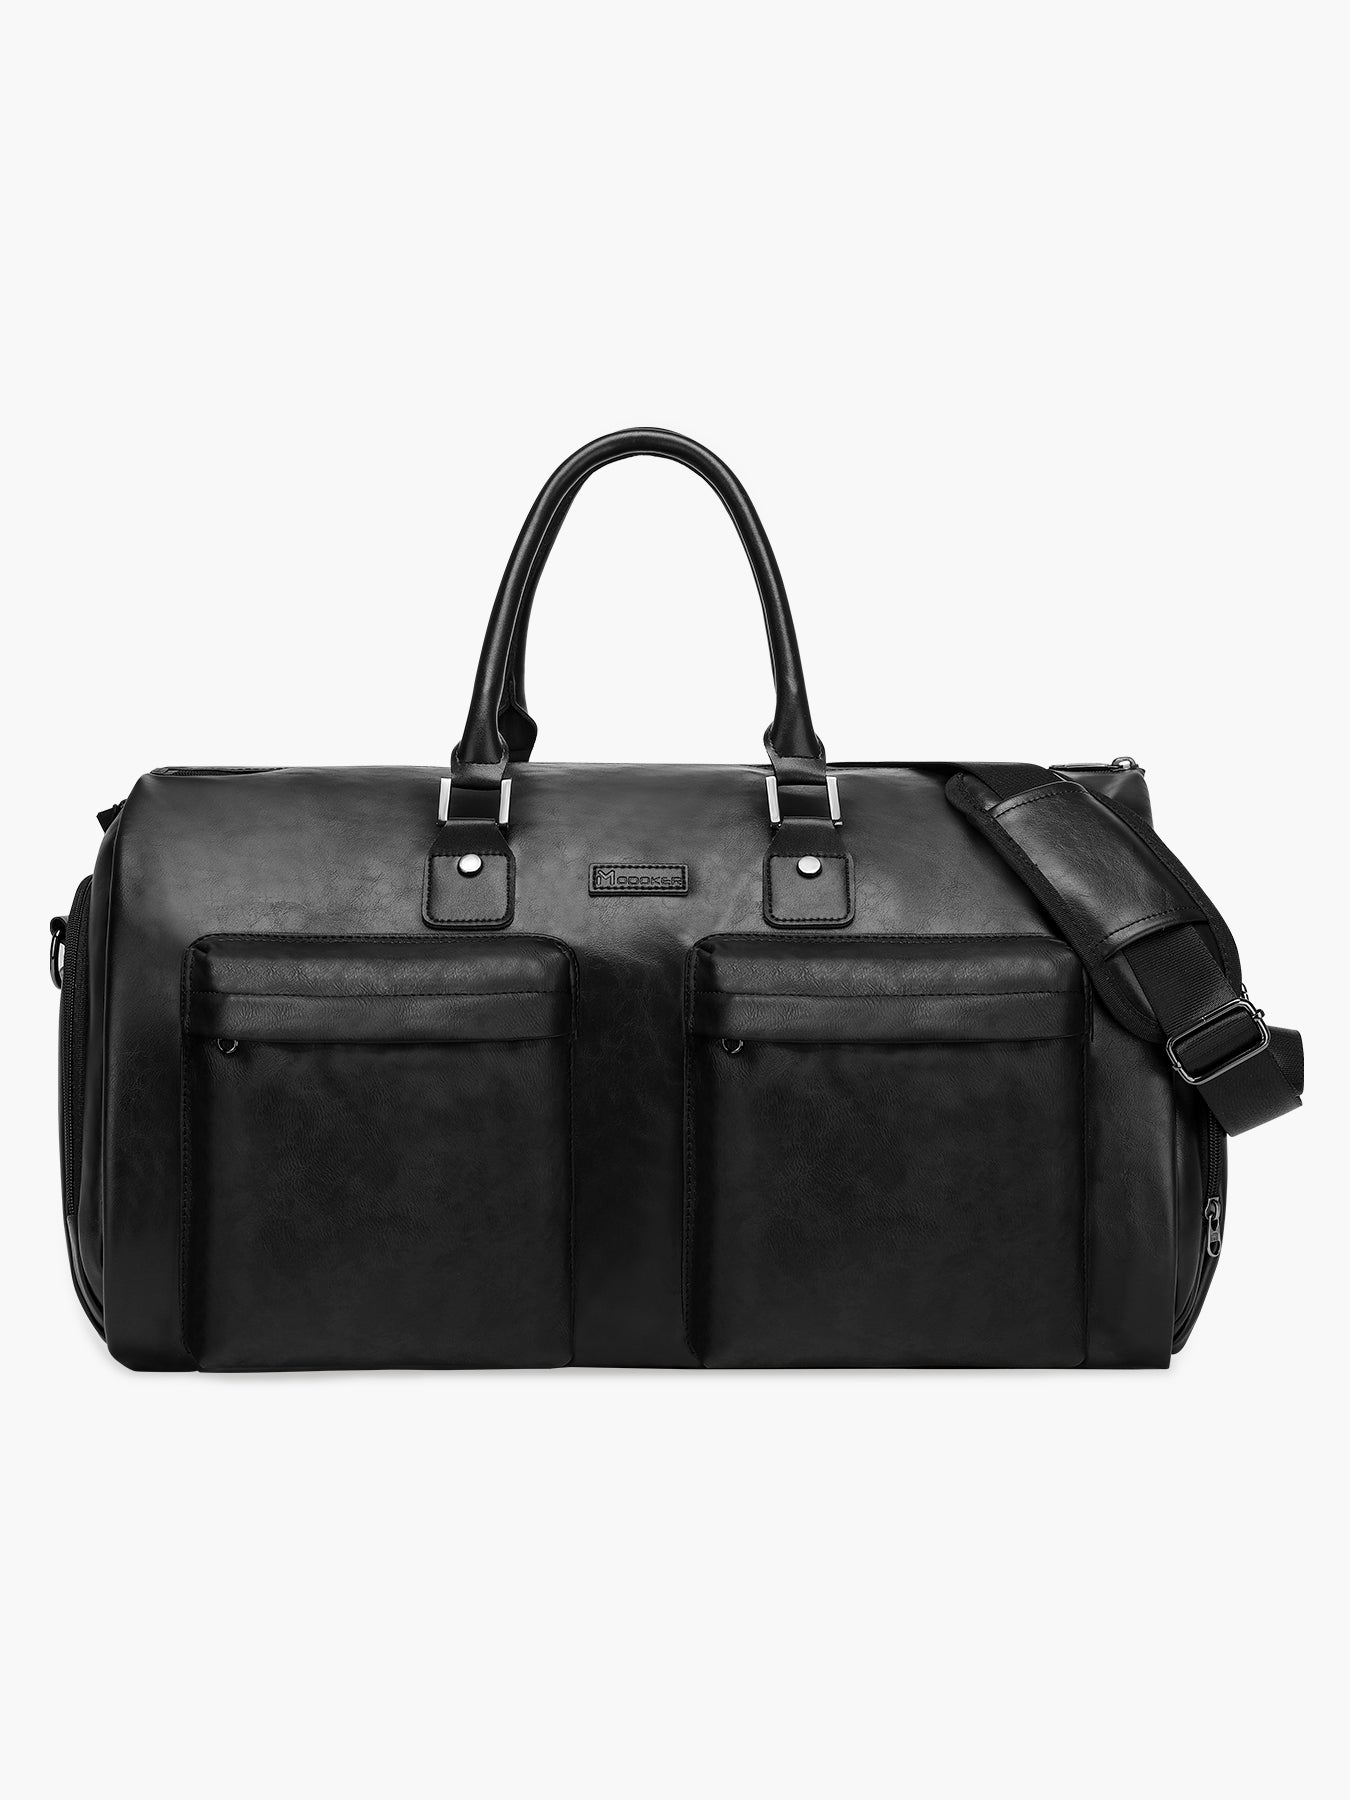 Black Convertible Leather Bag